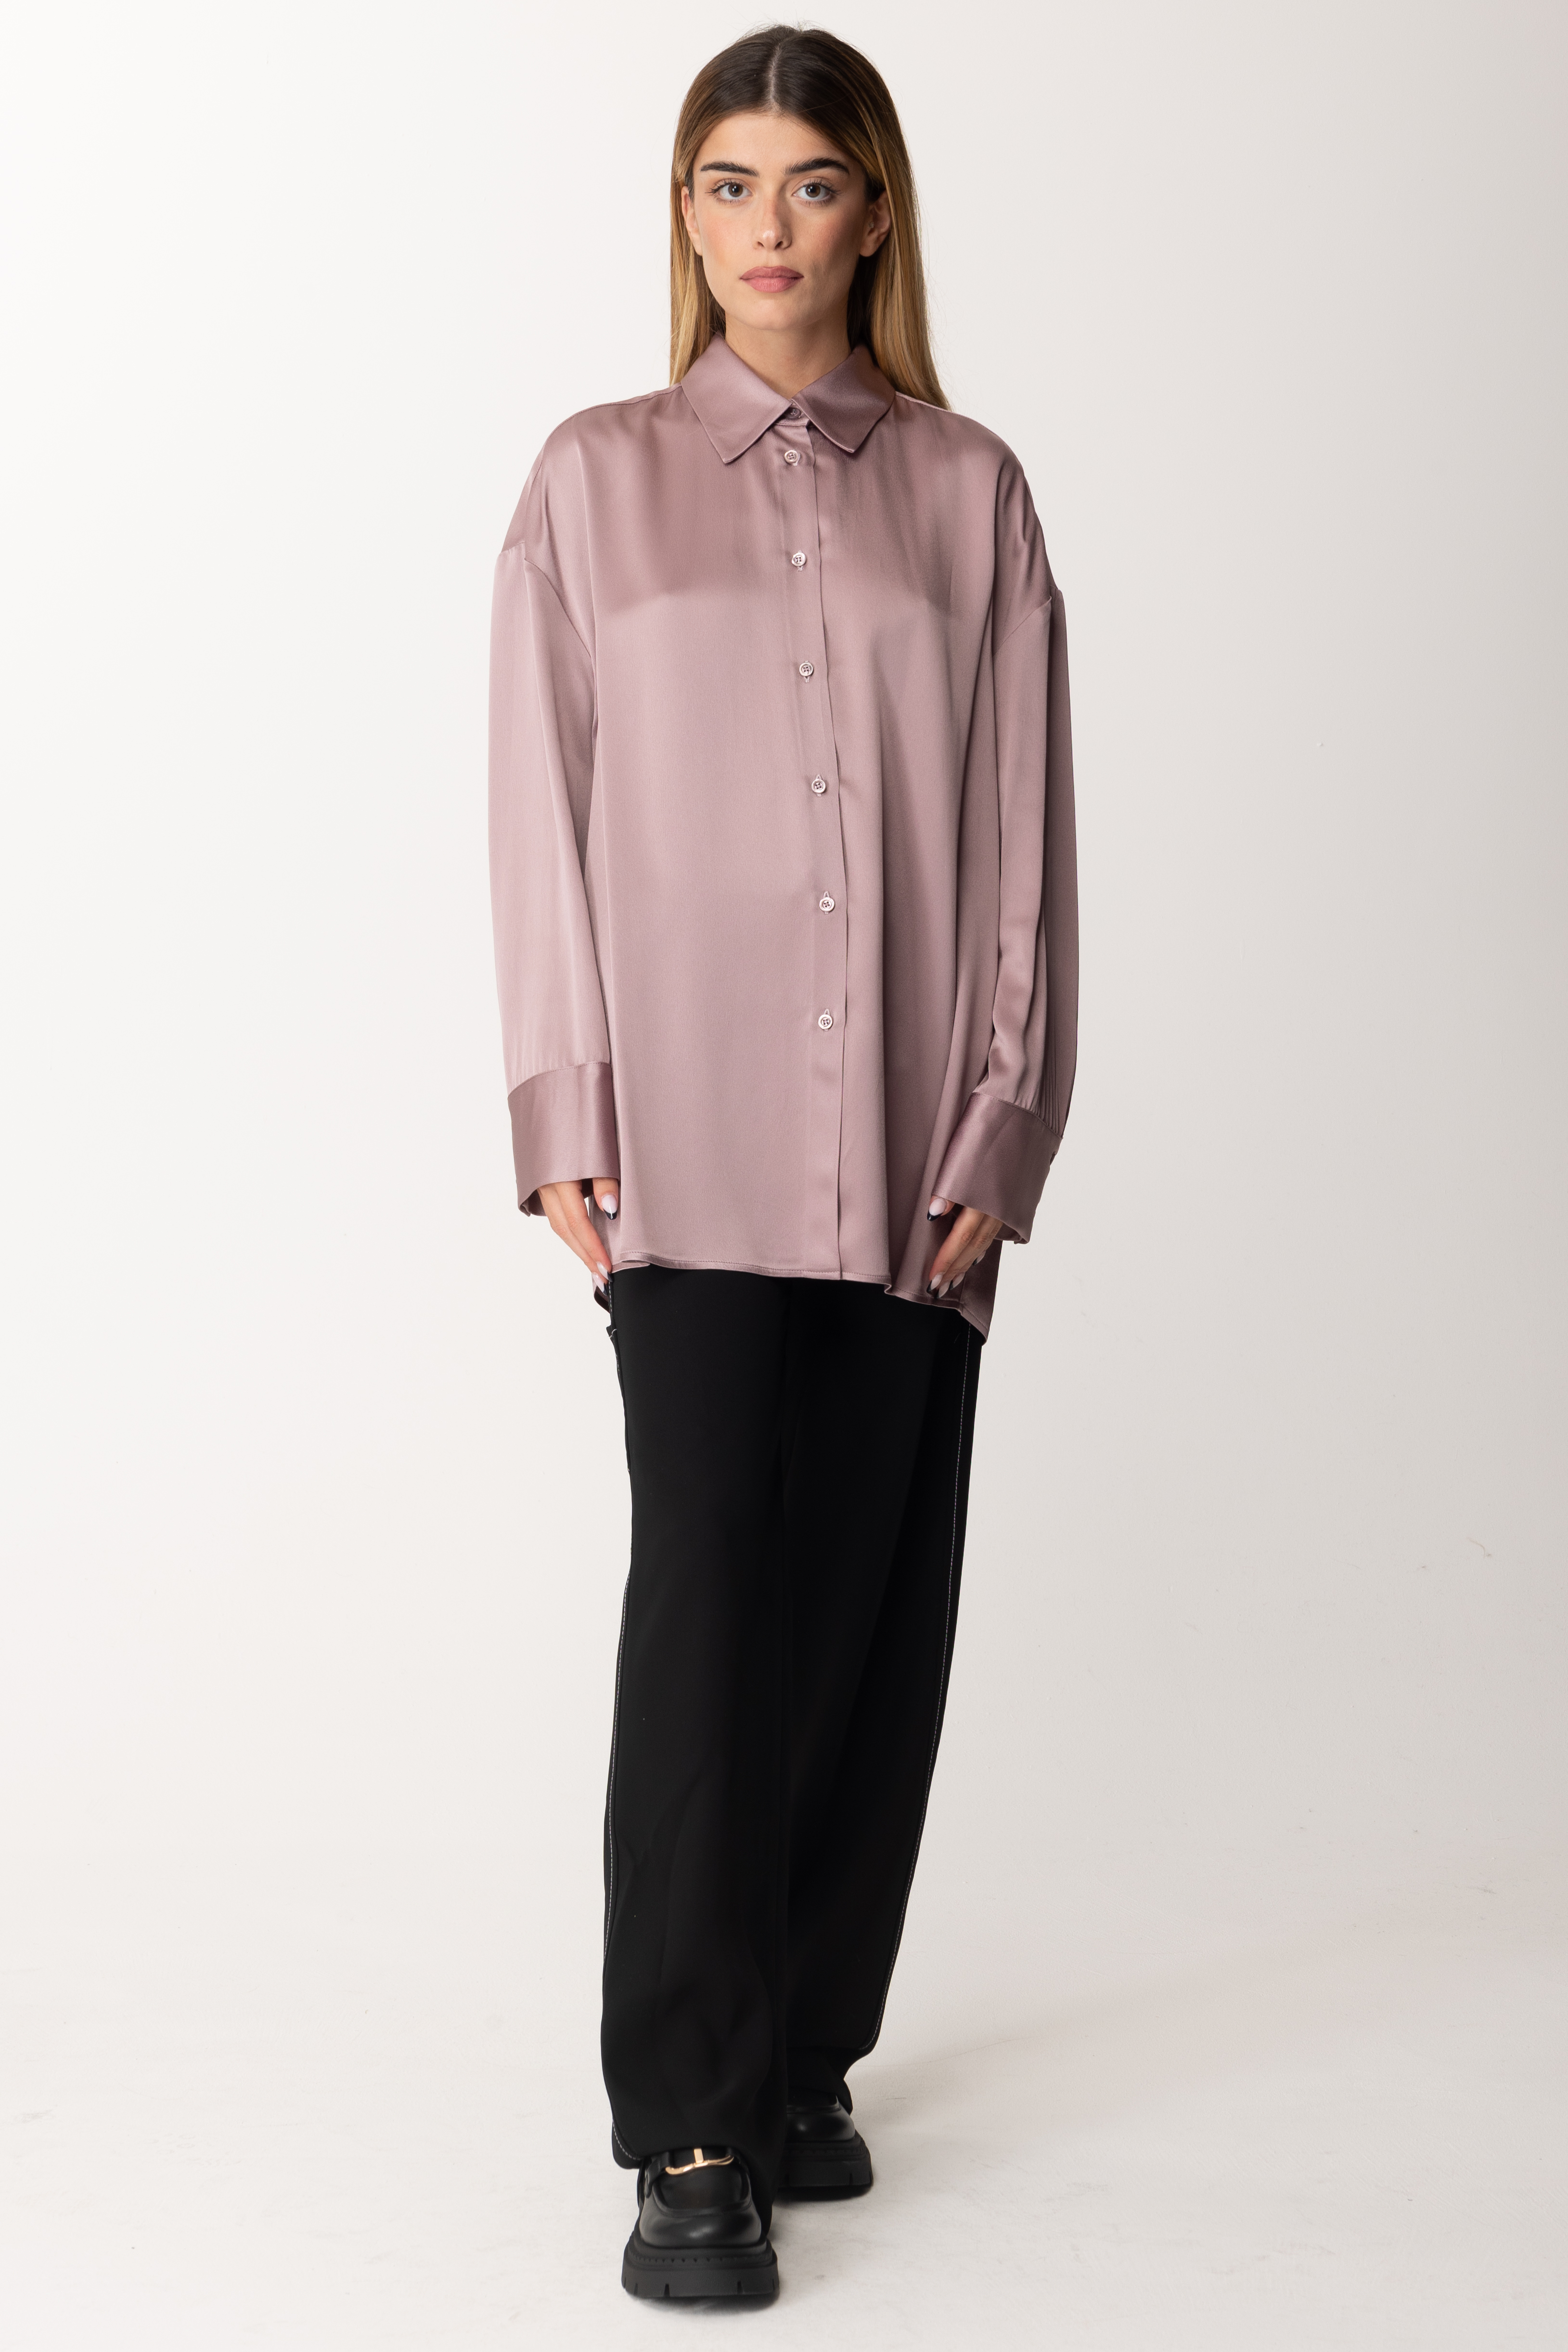 Preview: Semicouture Satin shirt BERRY